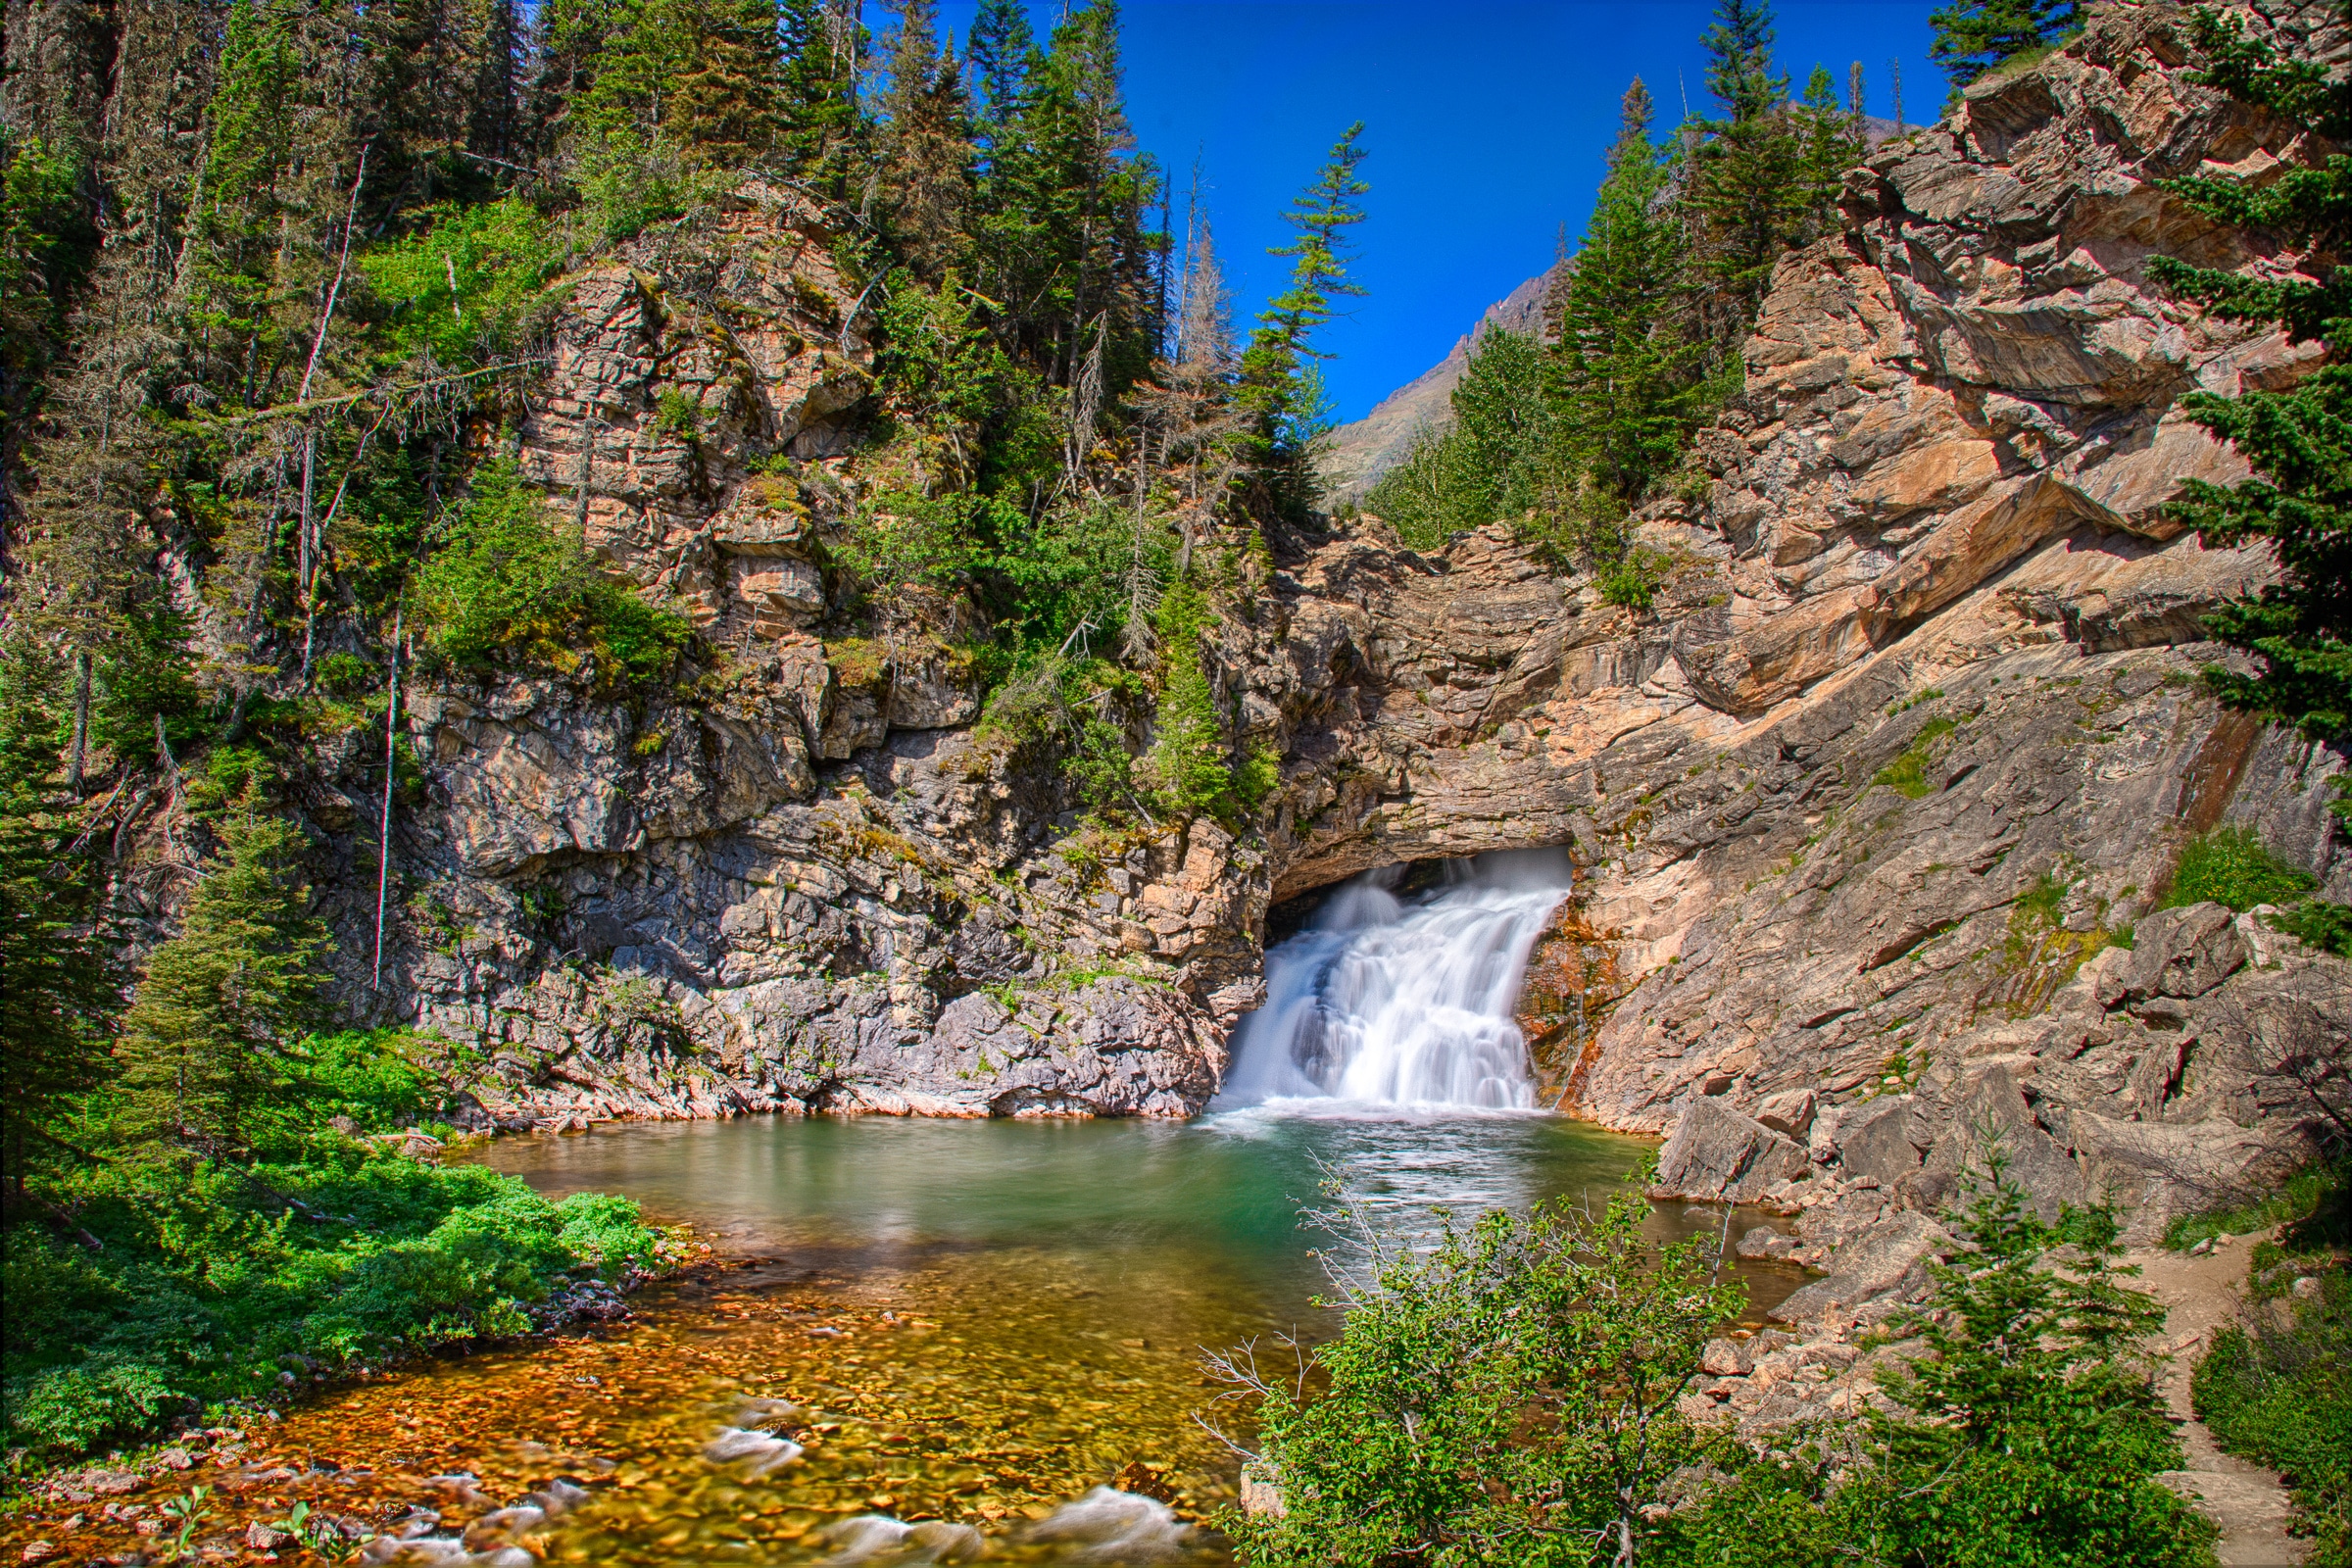 In late July, Running Eagle Falls, also known as Trick Falls, is flowing out of the lower opening. It is located near Two Medicine Trail in Glacier National Park, Montana.